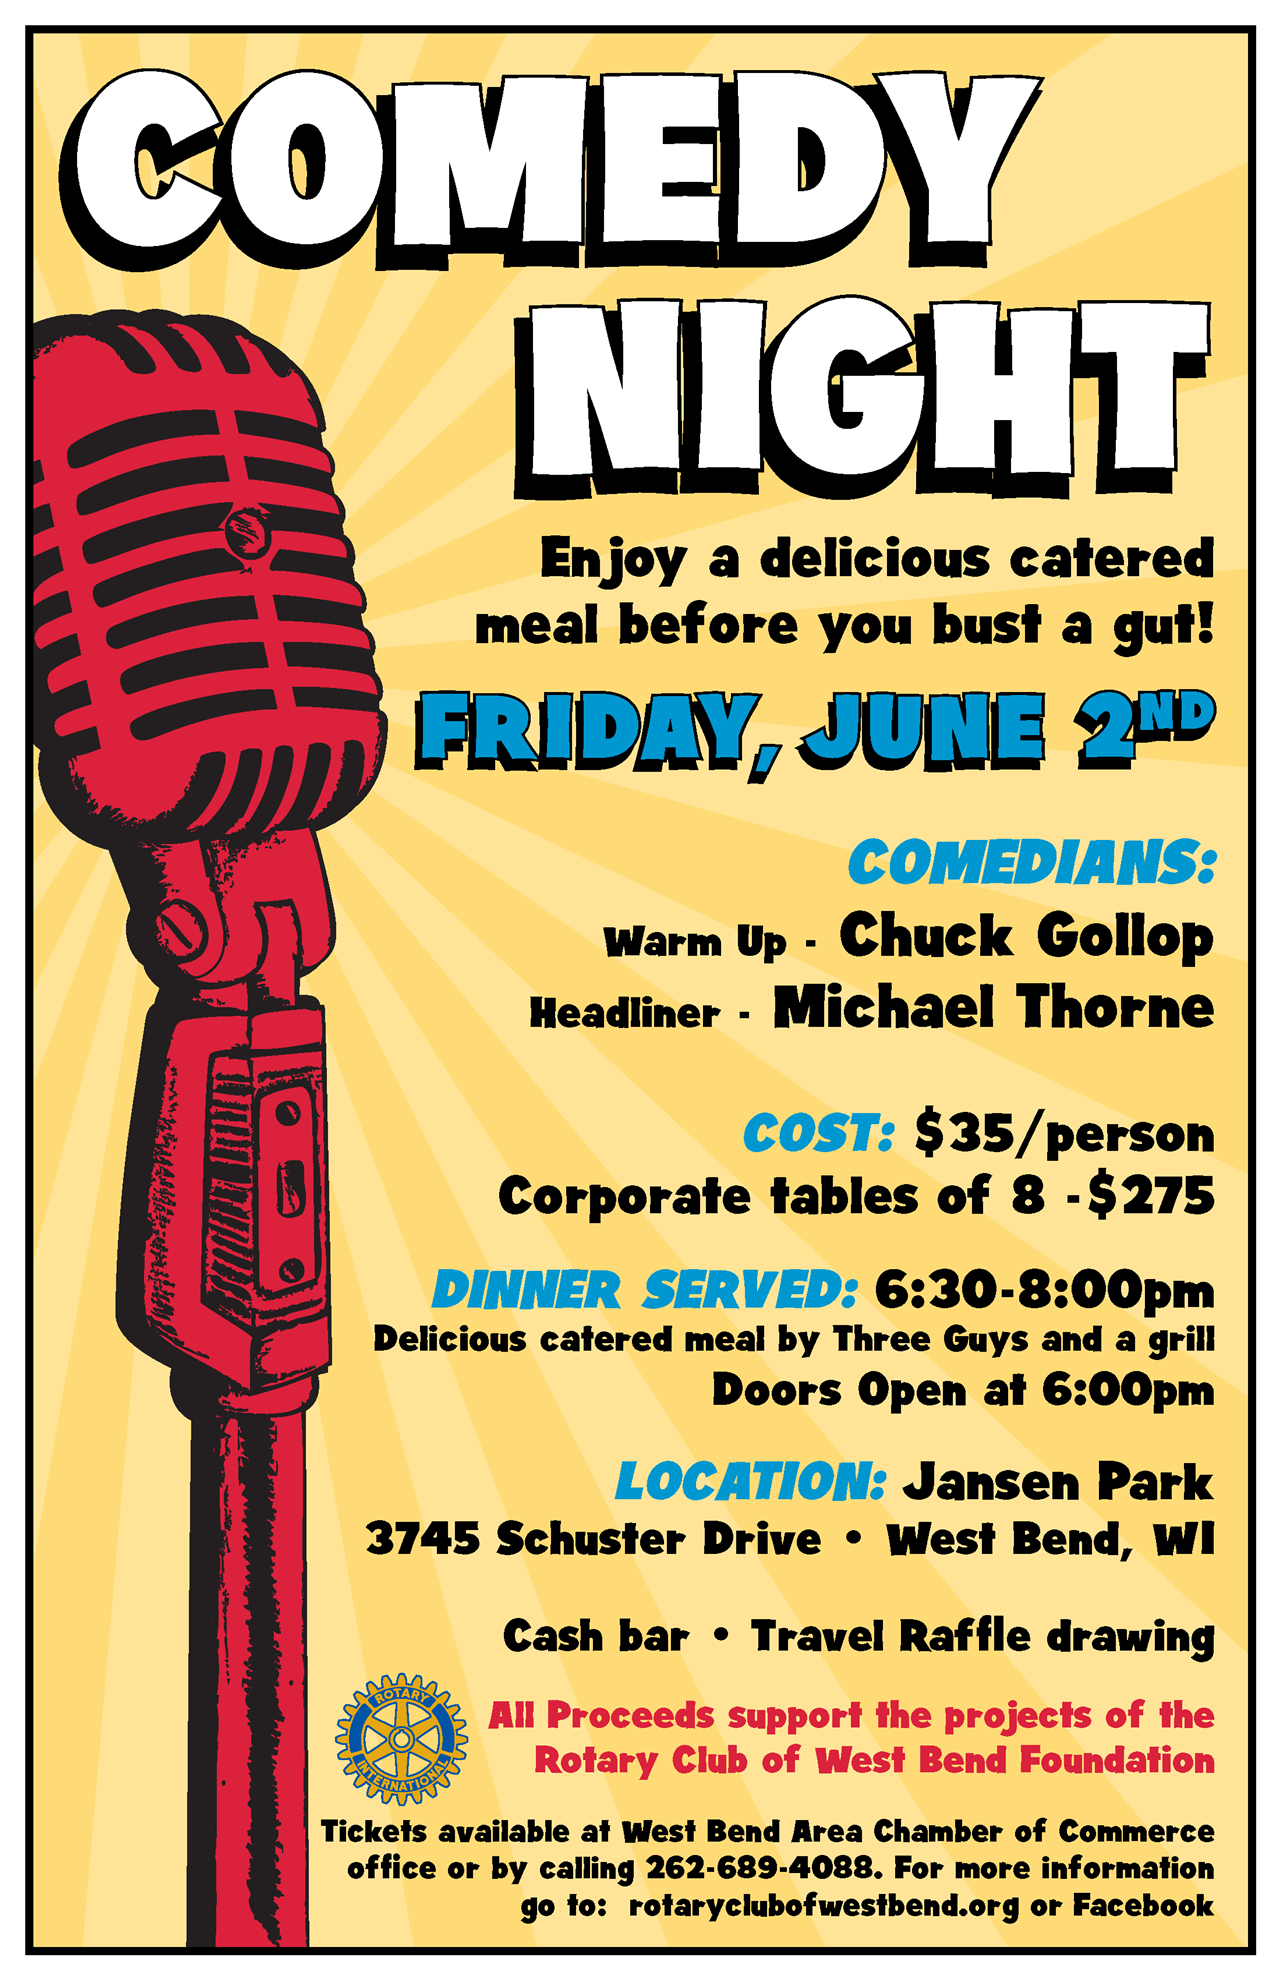 Comedy Night June 2nd Rotary Club of West Bend